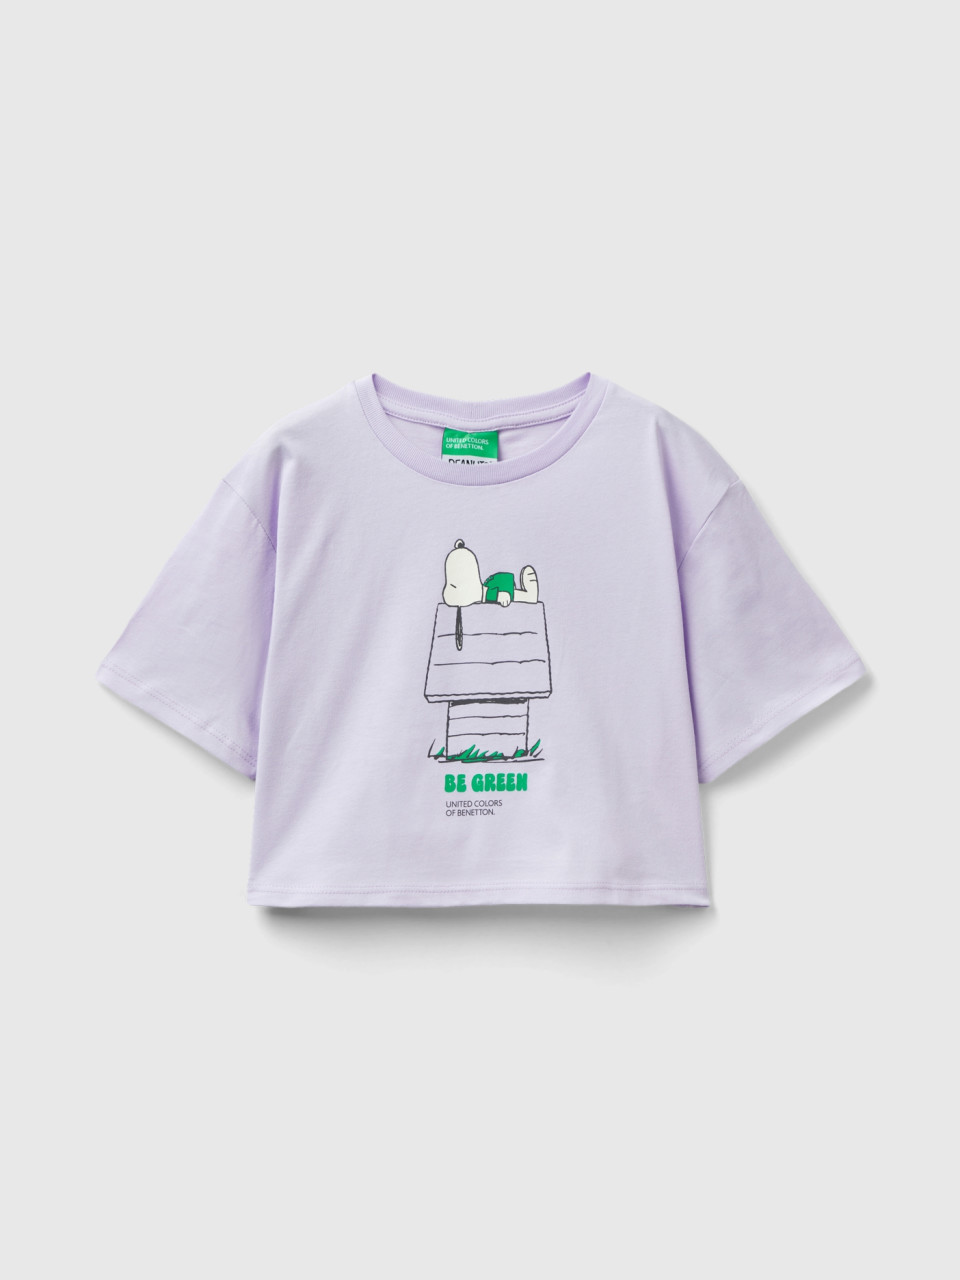 Benetton, Cropped ©peanuts T-shirt, Lilac, Kids